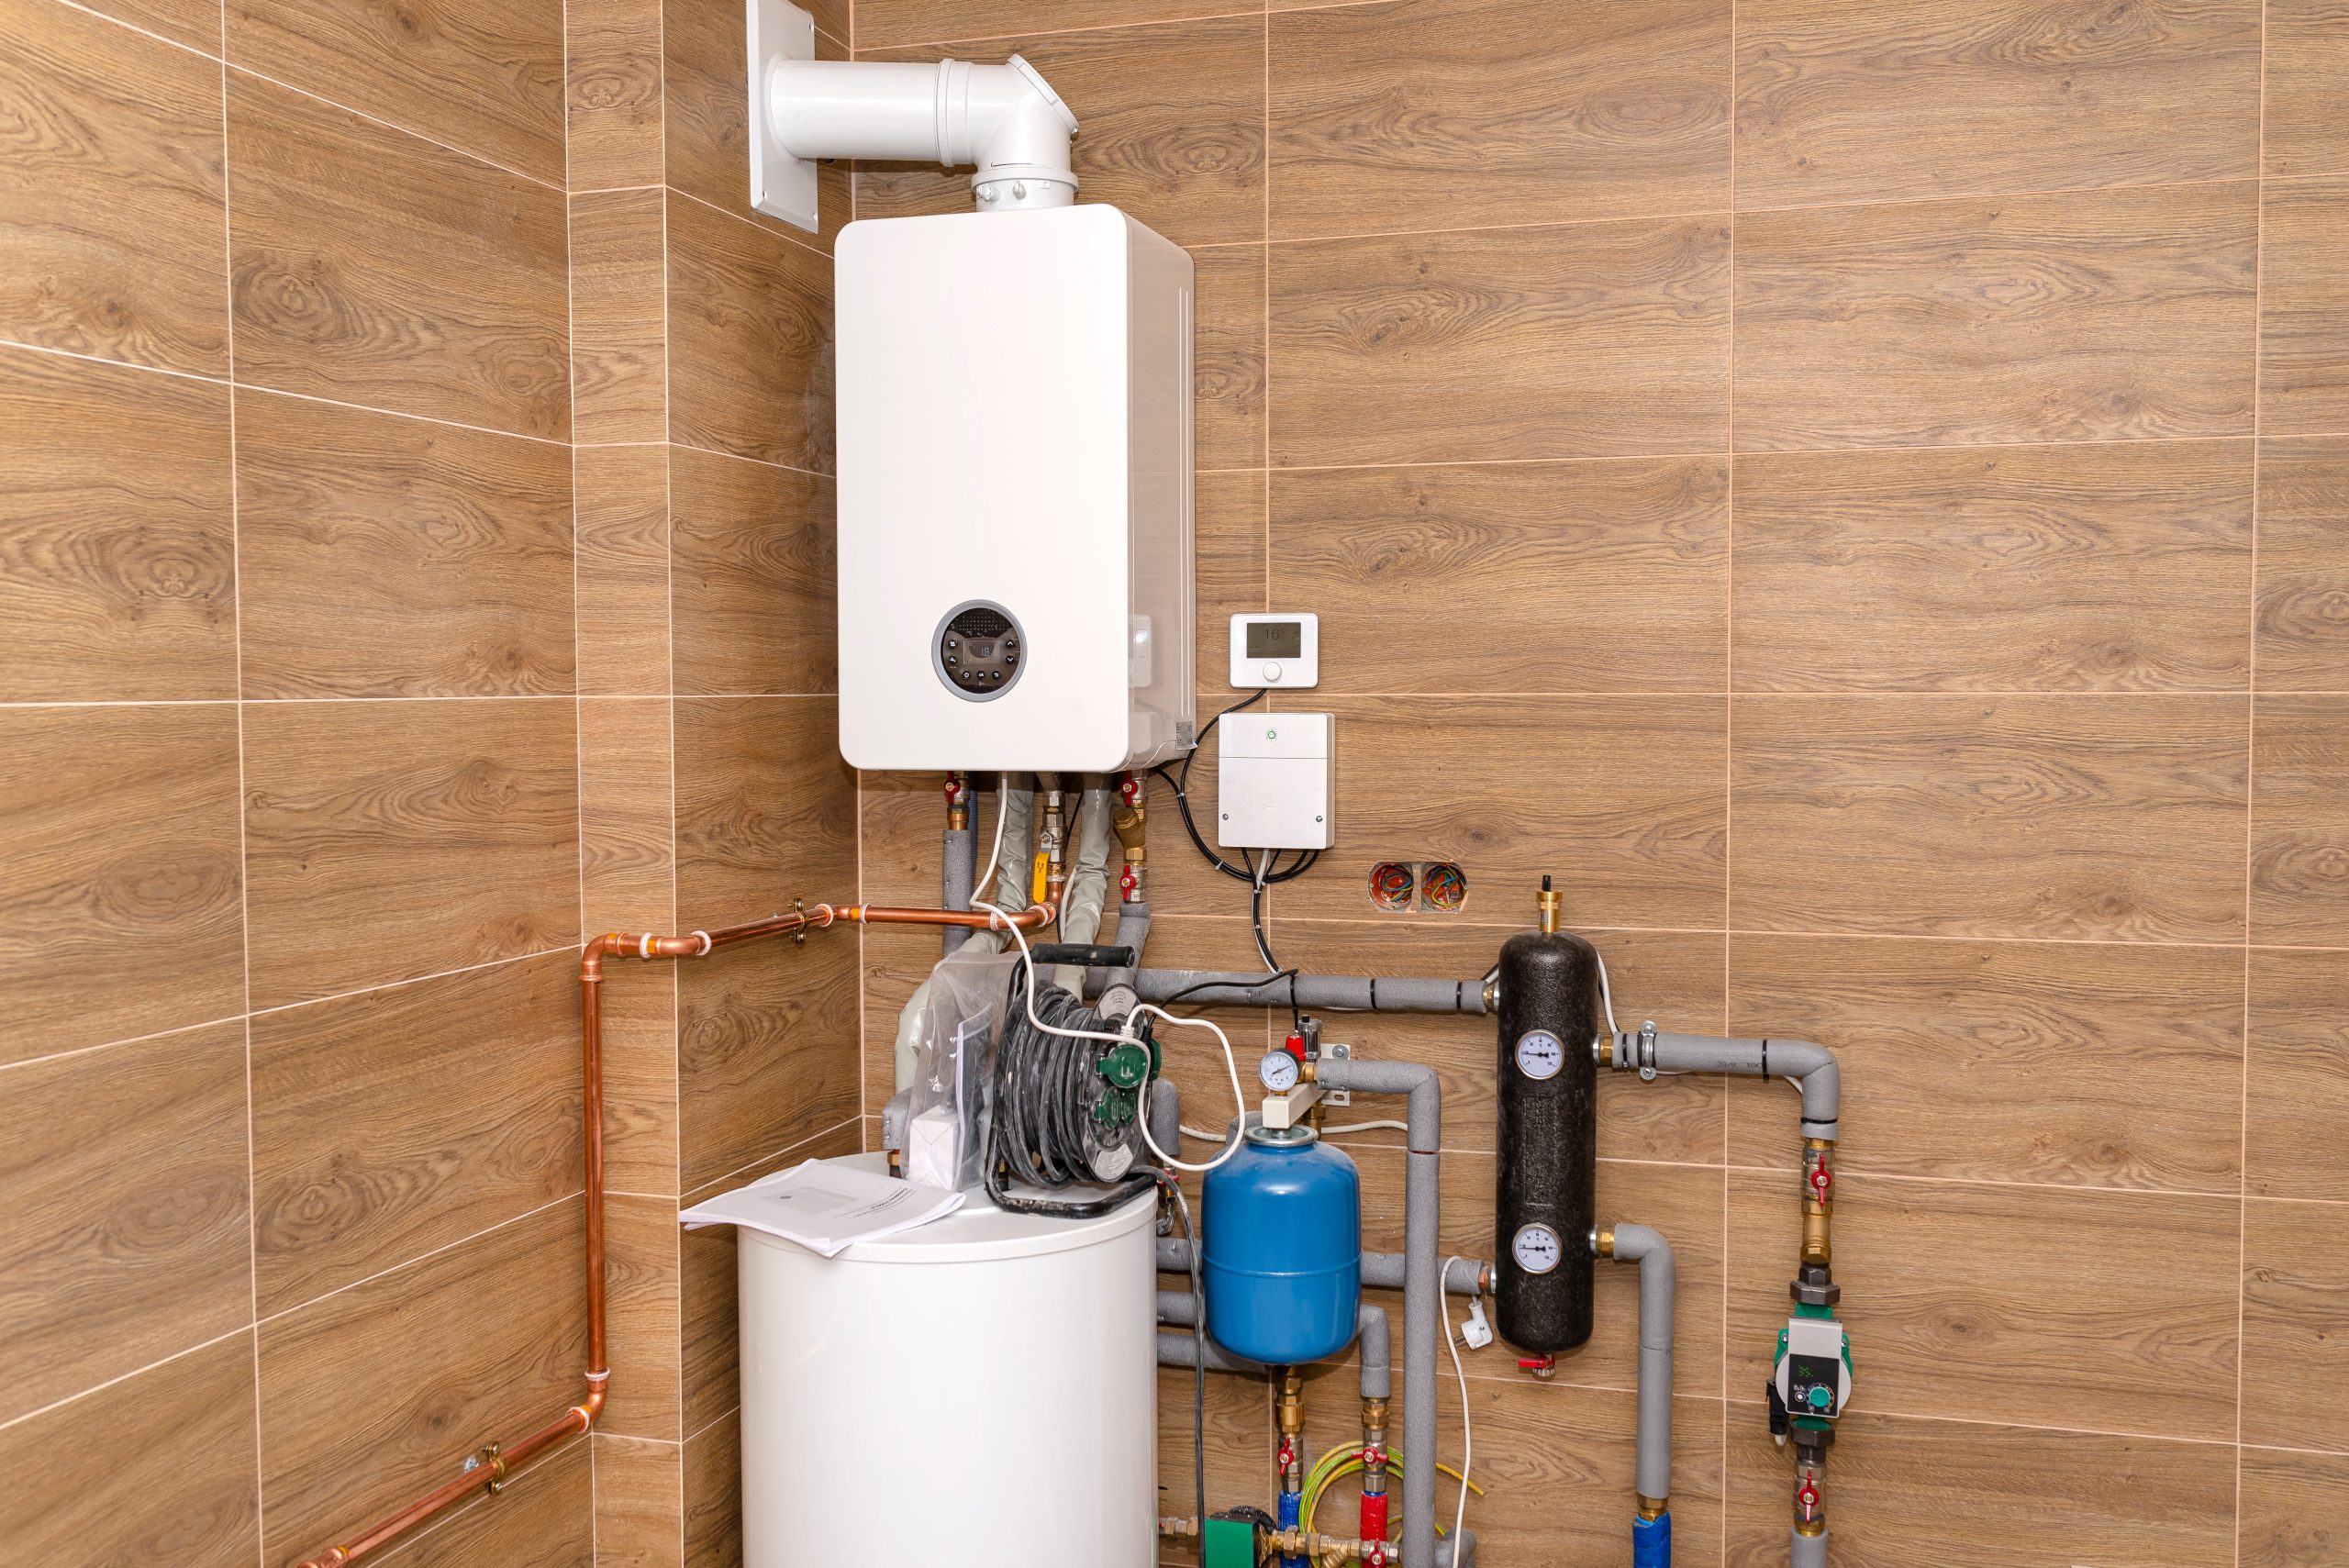 Gas Plumber Perth from Perth Plumbing and Gasfitting